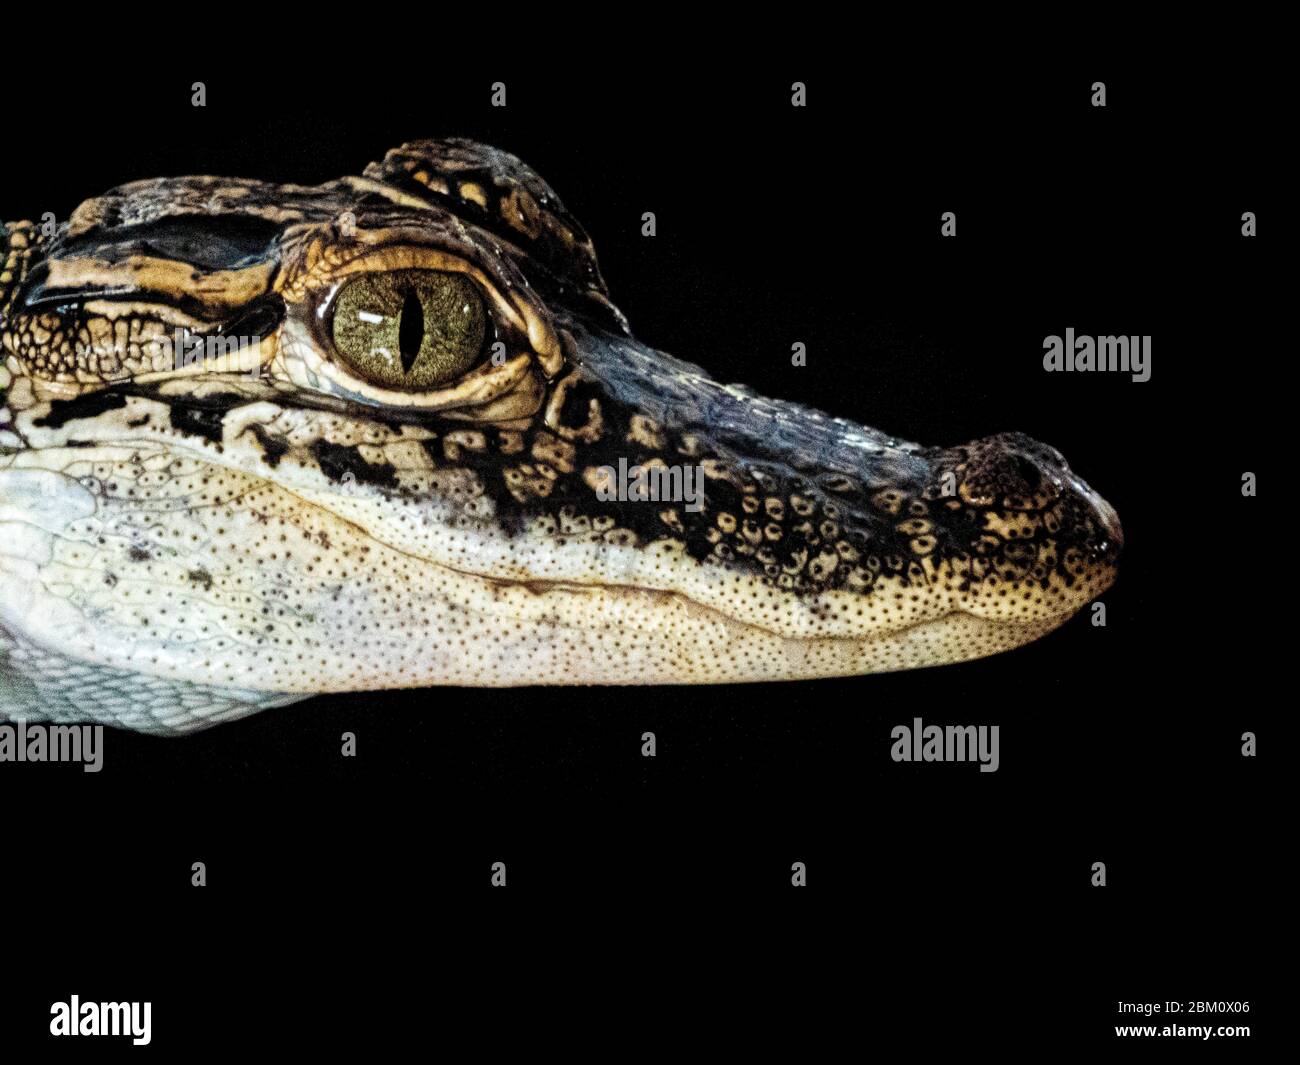 Night photography of a Close up of an alligator in the Louisiana bayou, USA Stock Photo